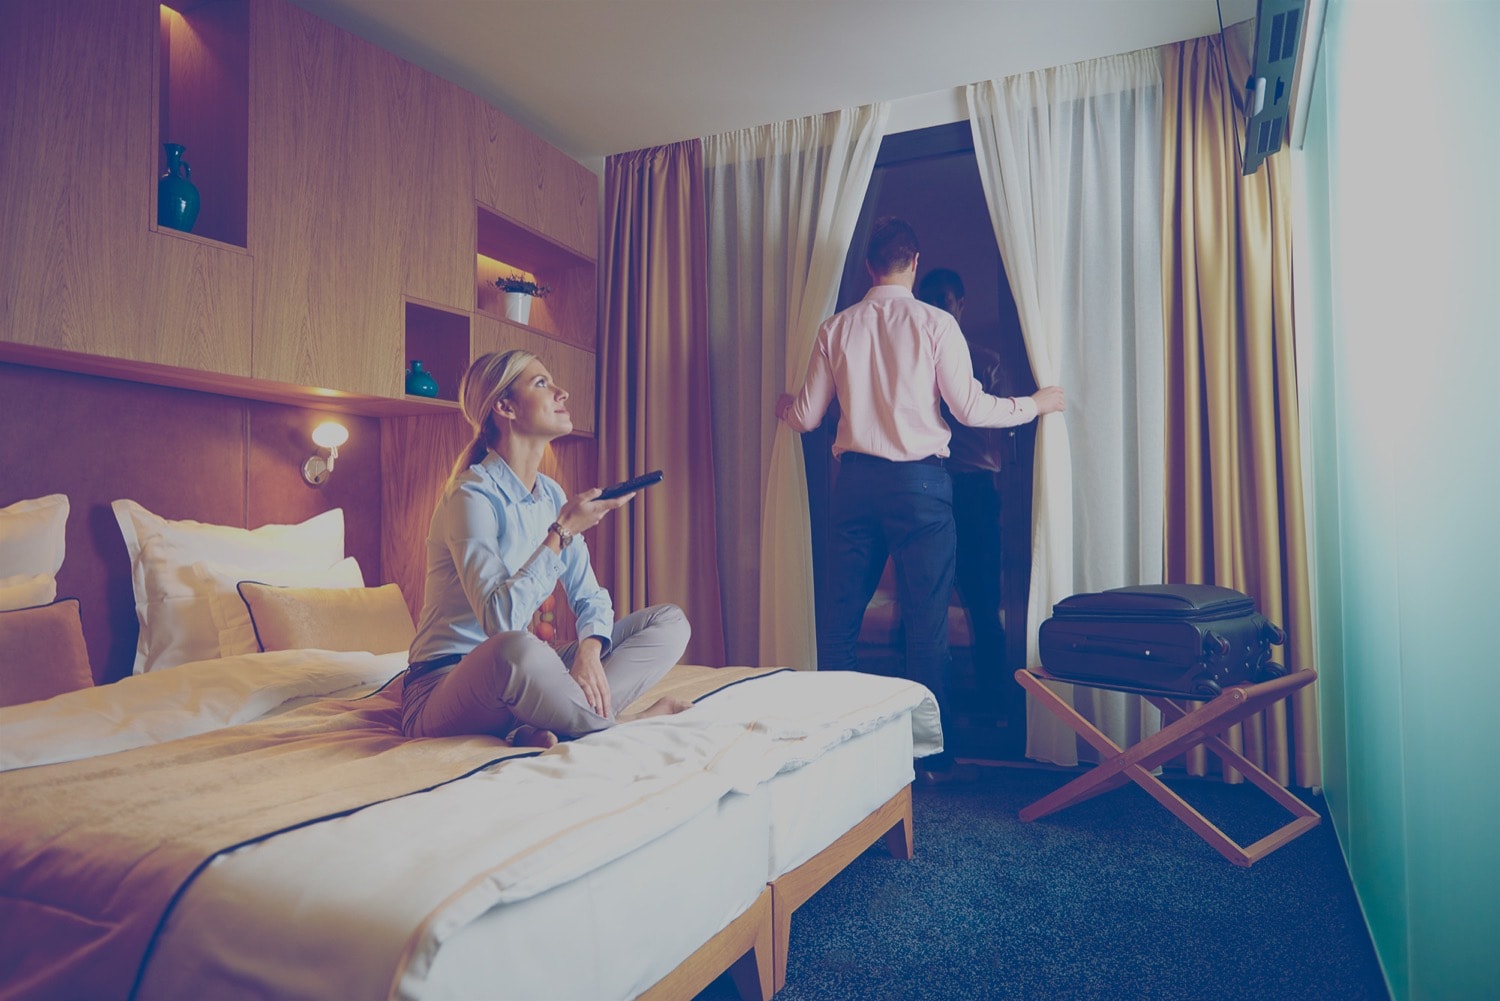 Couple in a hotel room. The woman is turning on a propane-powered heater, and the man is looking out the window. 